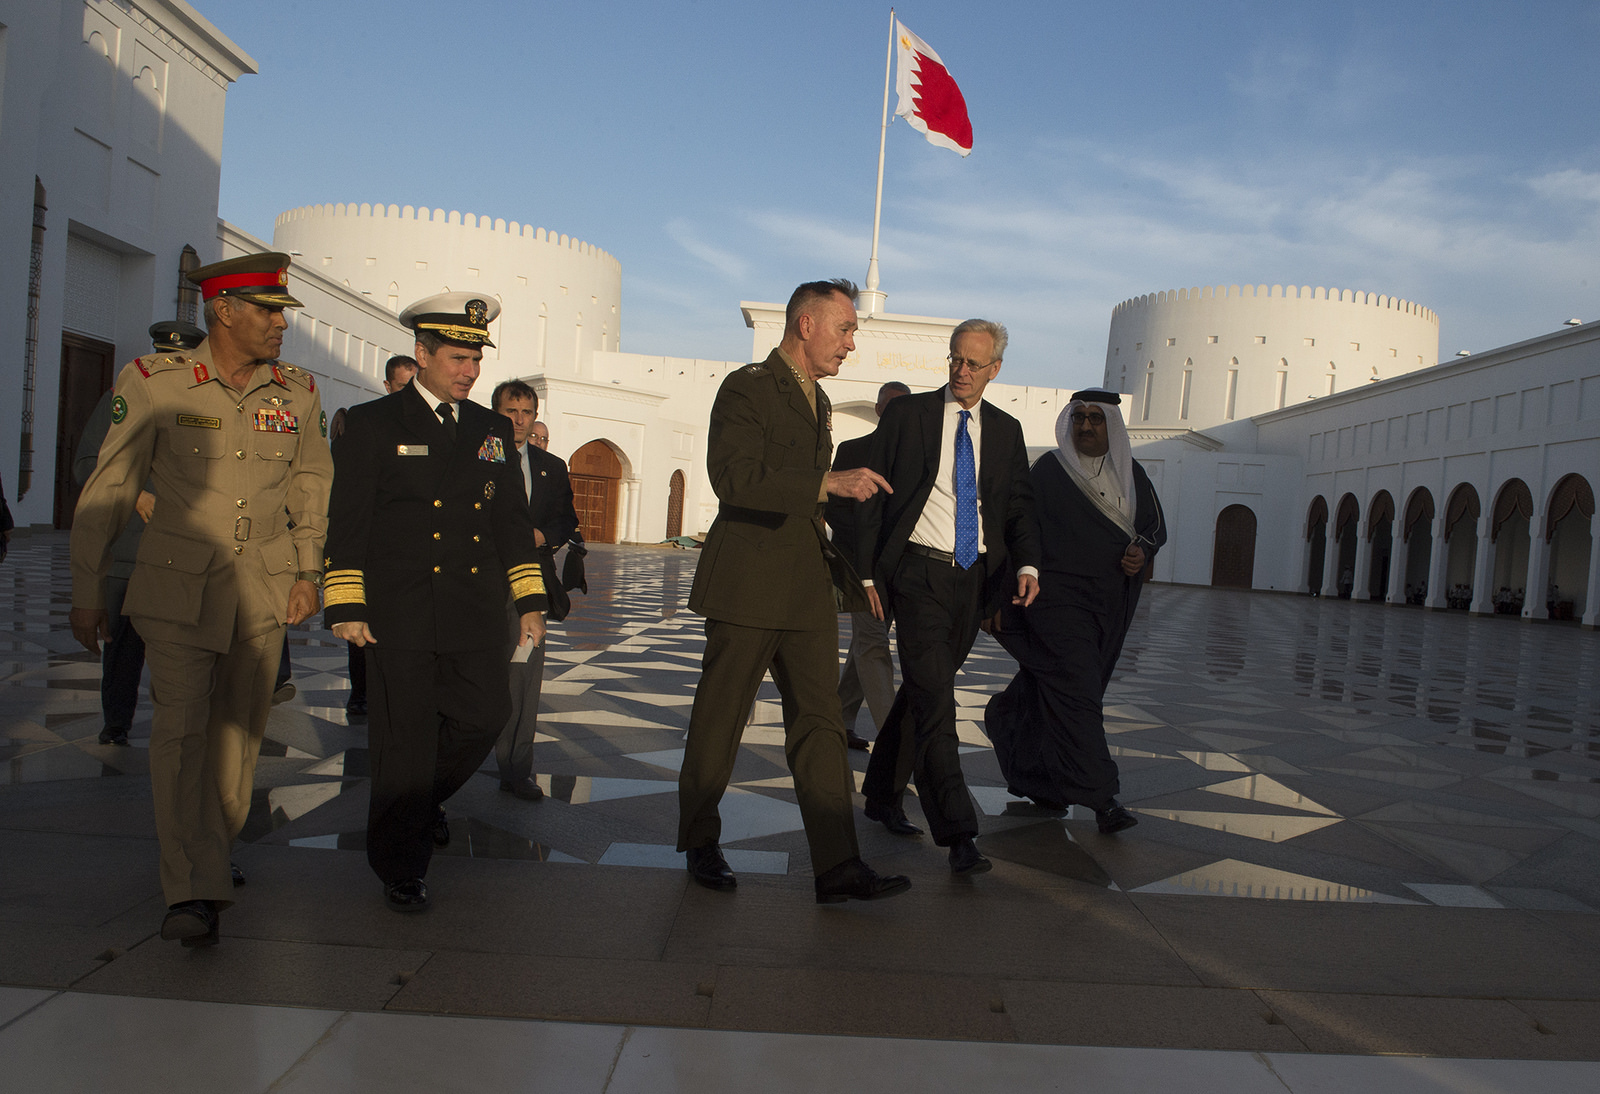 Dunford and Roebuck walking outside the King's Palace in Bahrain